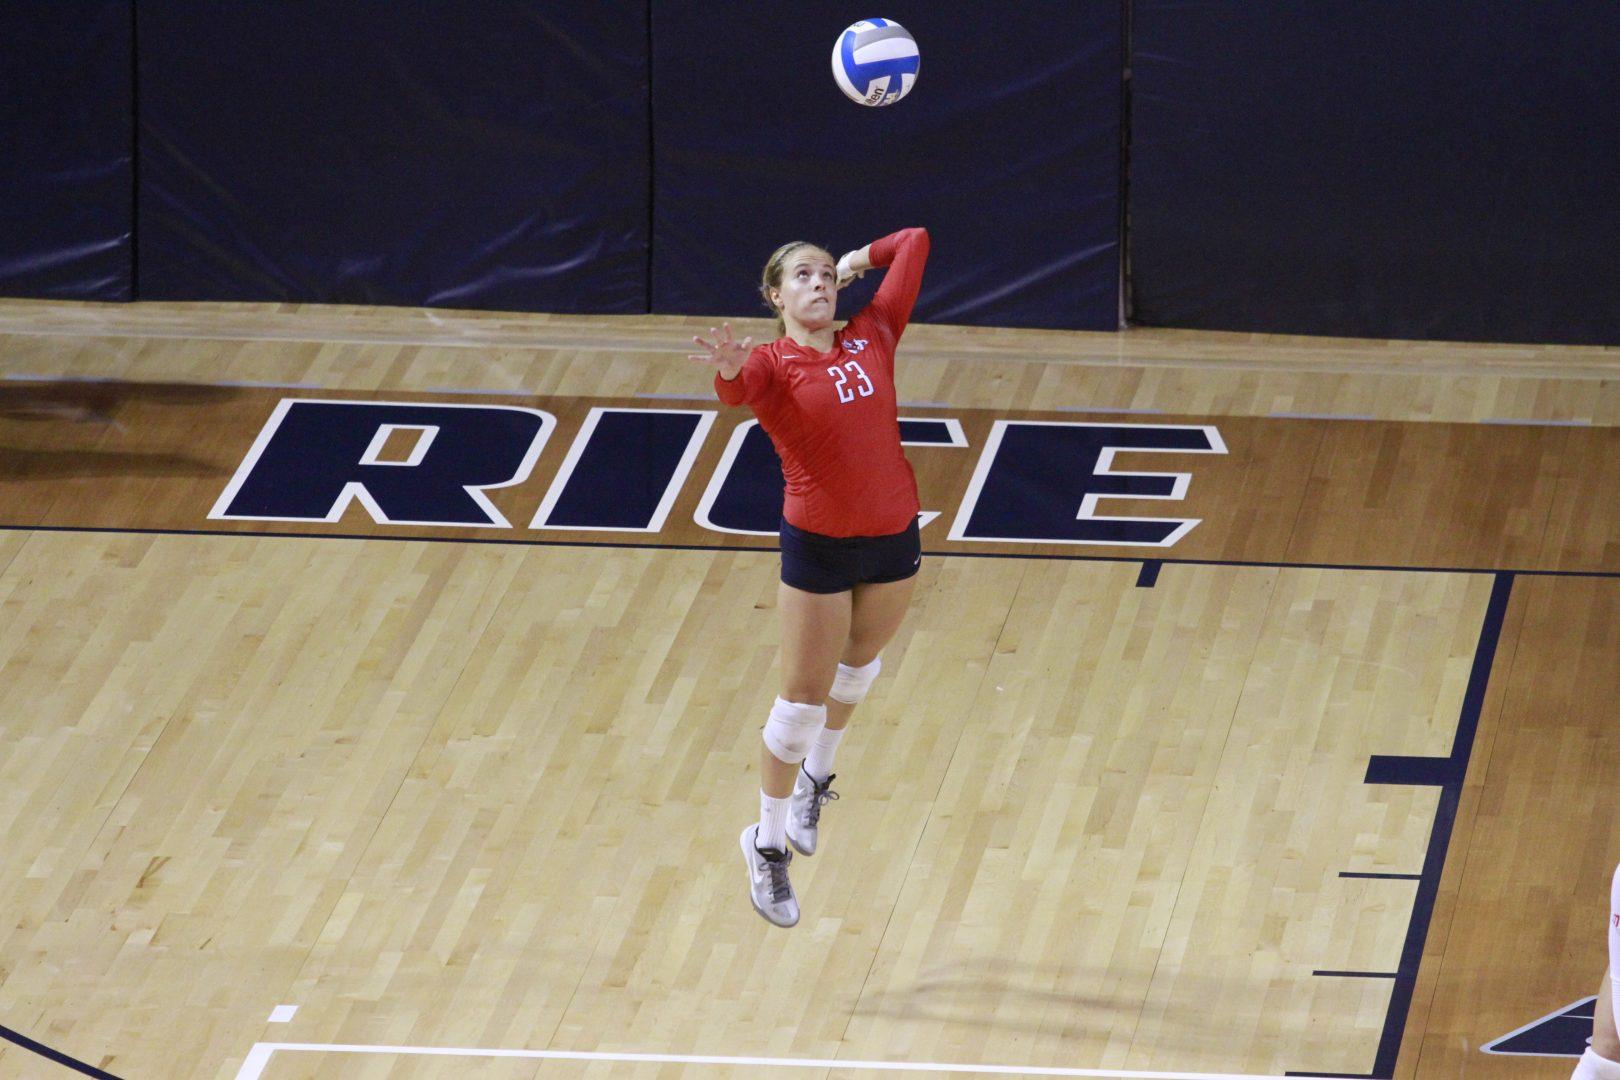 Fresno State sophomore libero Maggie Eppright fields the ball during the Bulldogs’ appearance at the Adidas Rice Invitational last August. Photo by Geoff Thurner/Fresno State Athletics